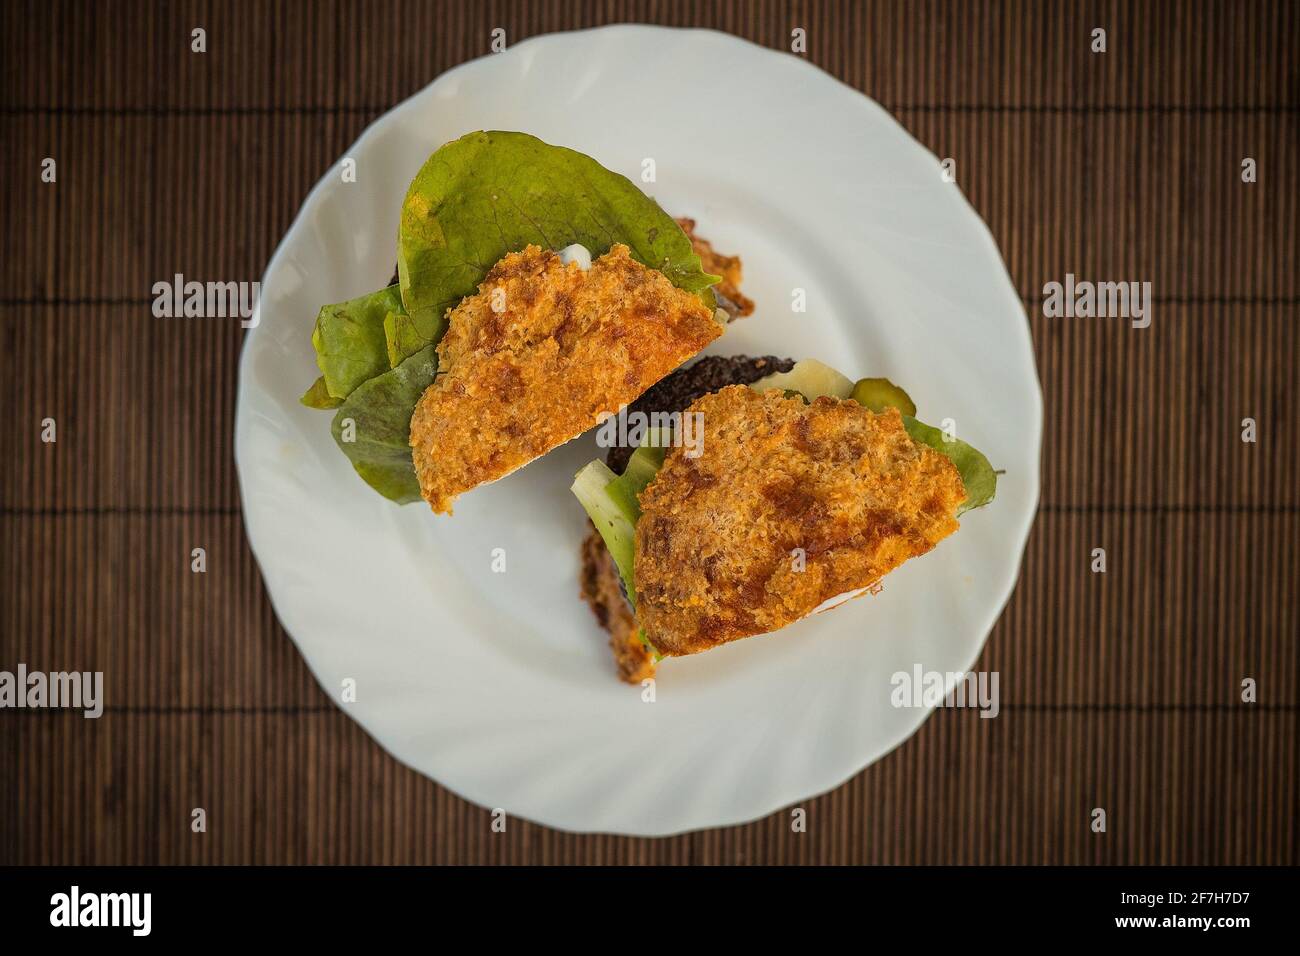 Top view of LCHF Low carbohydrate high fat burger or hamburger meal. LCHF burger with non carbohydrate bread made of sesame, eggs, chees, almonds. Con Stock Photo